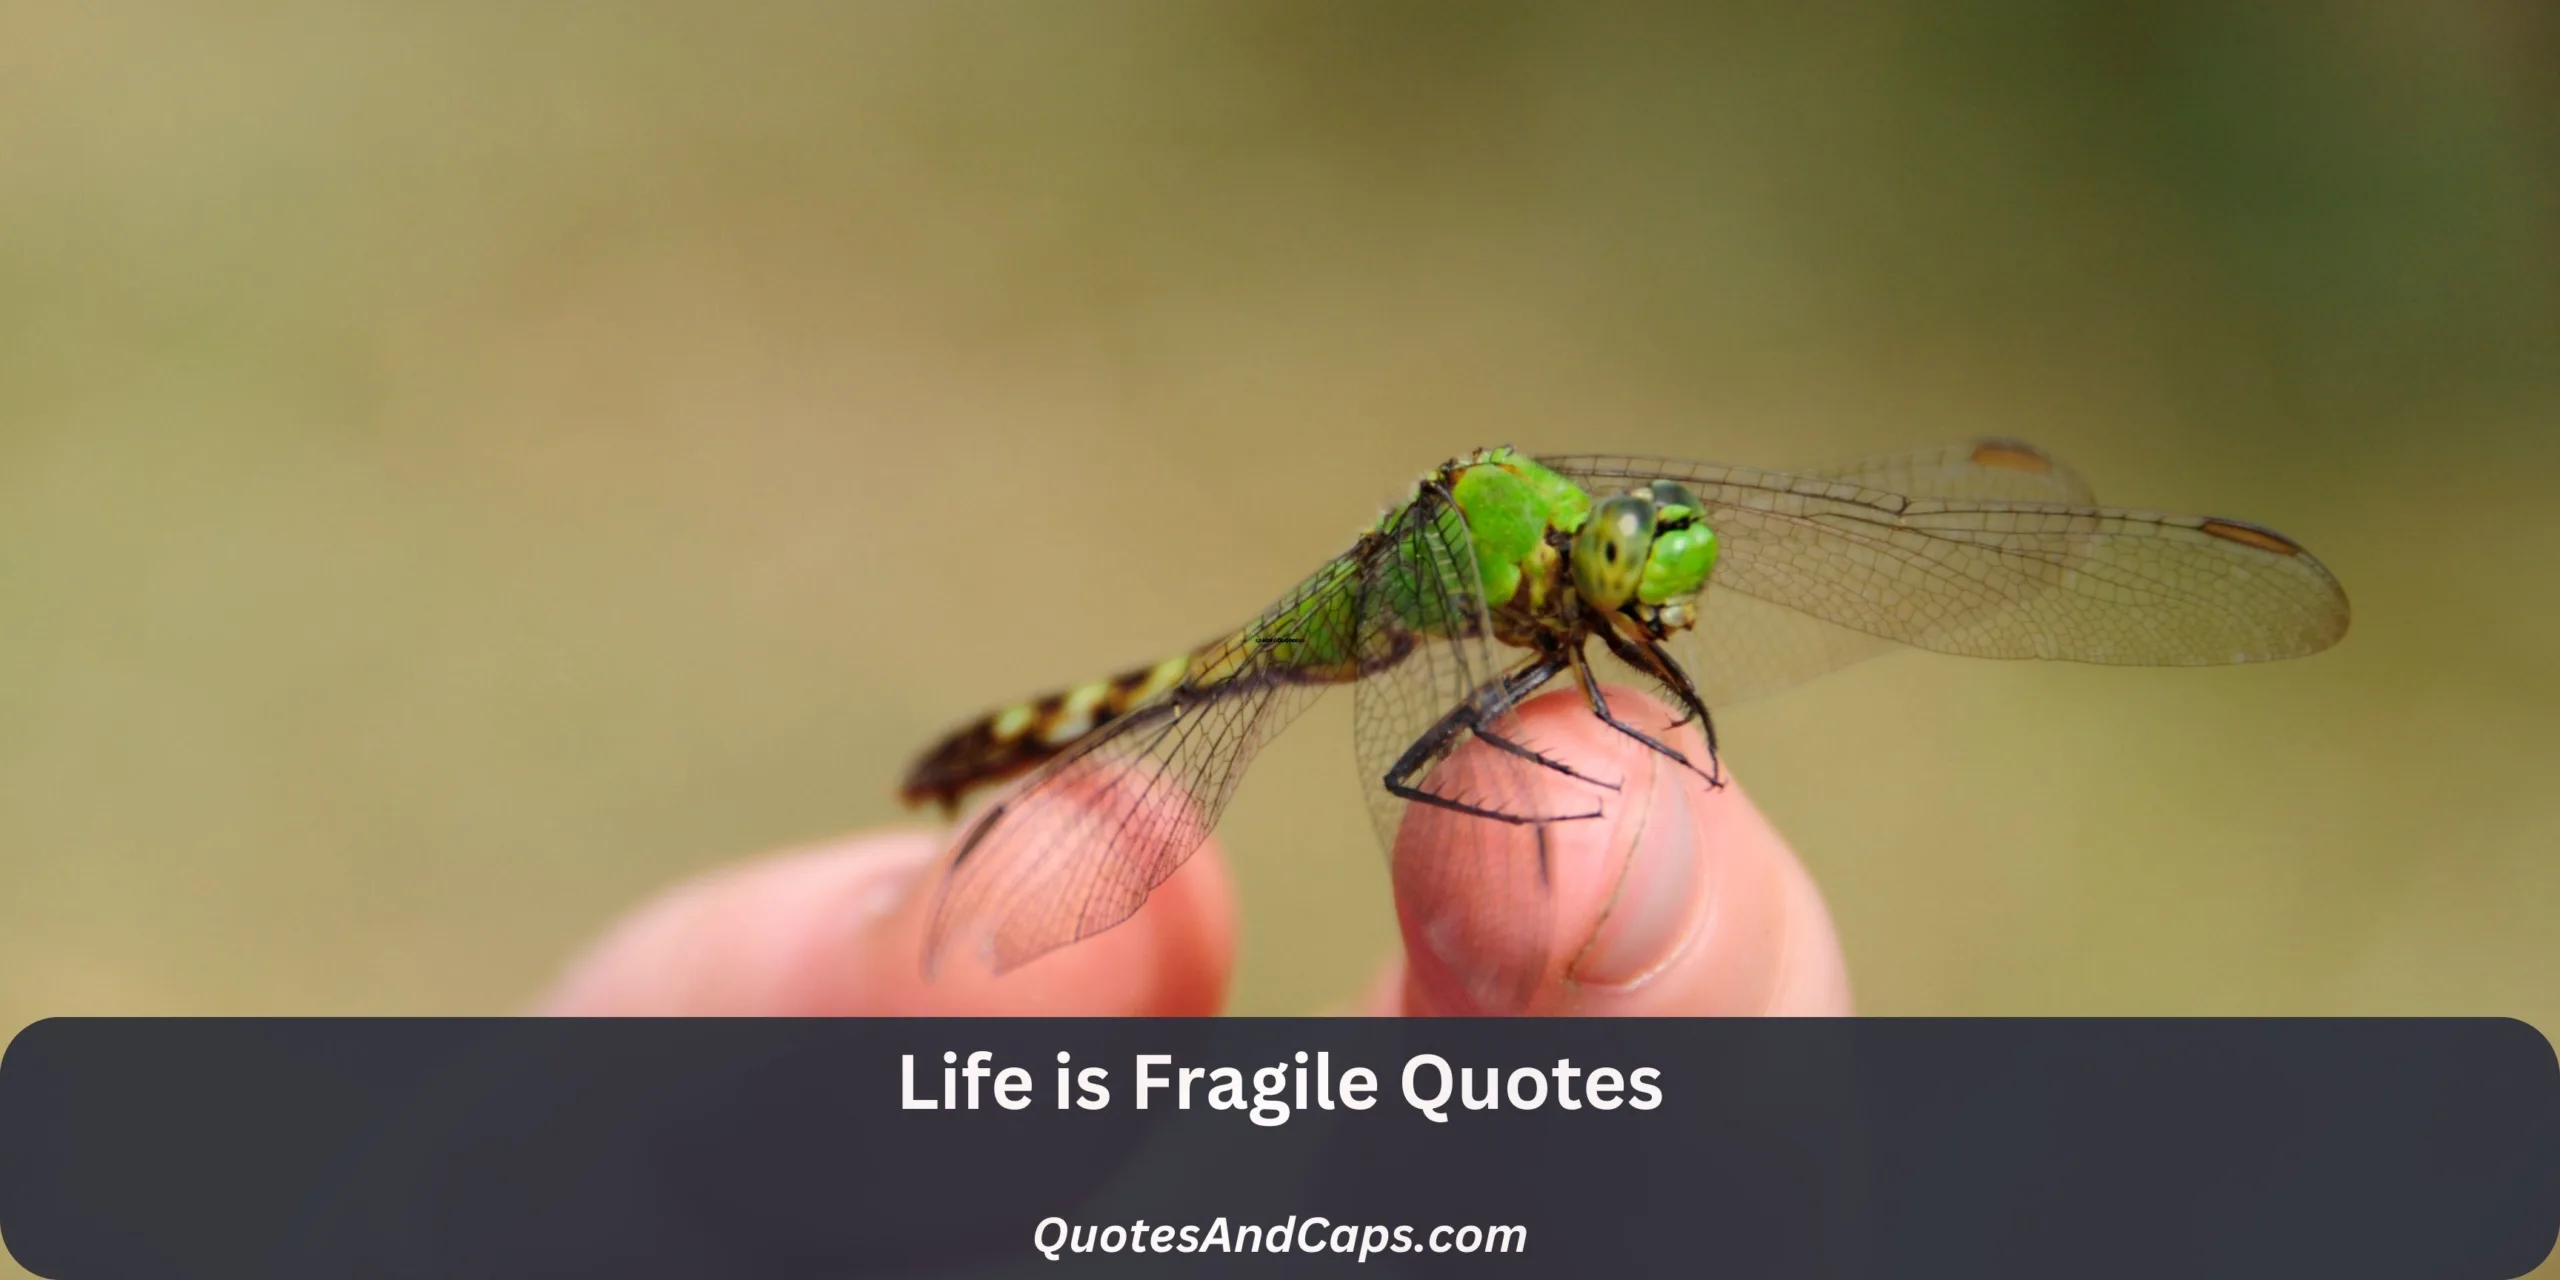 Life is Fragile Quotes